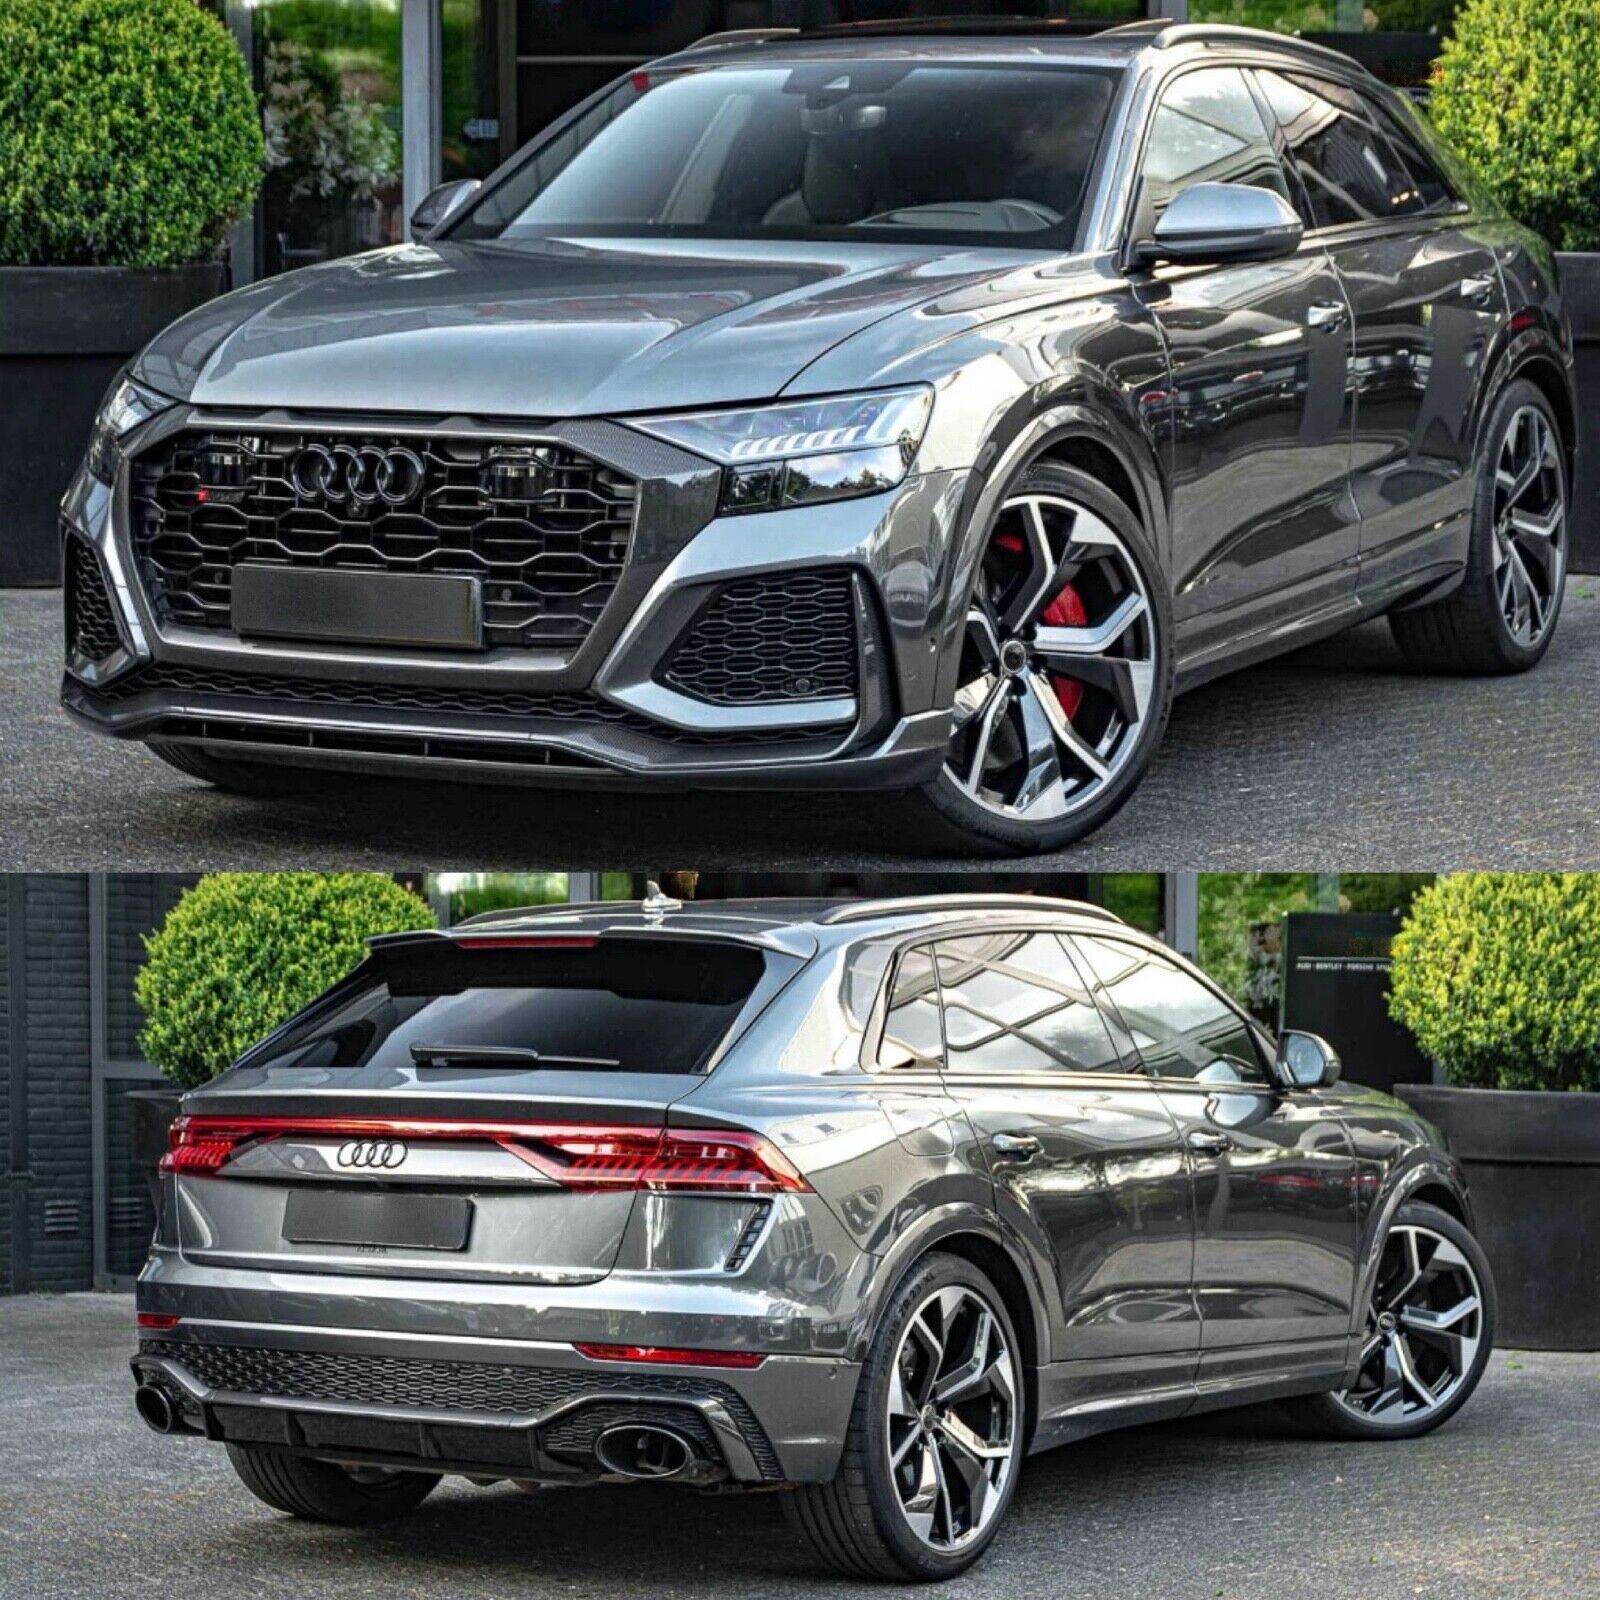 BKM RS Style RSQ8 Upgrade Body Kits for Audi Q8 / SQ8 PP Material